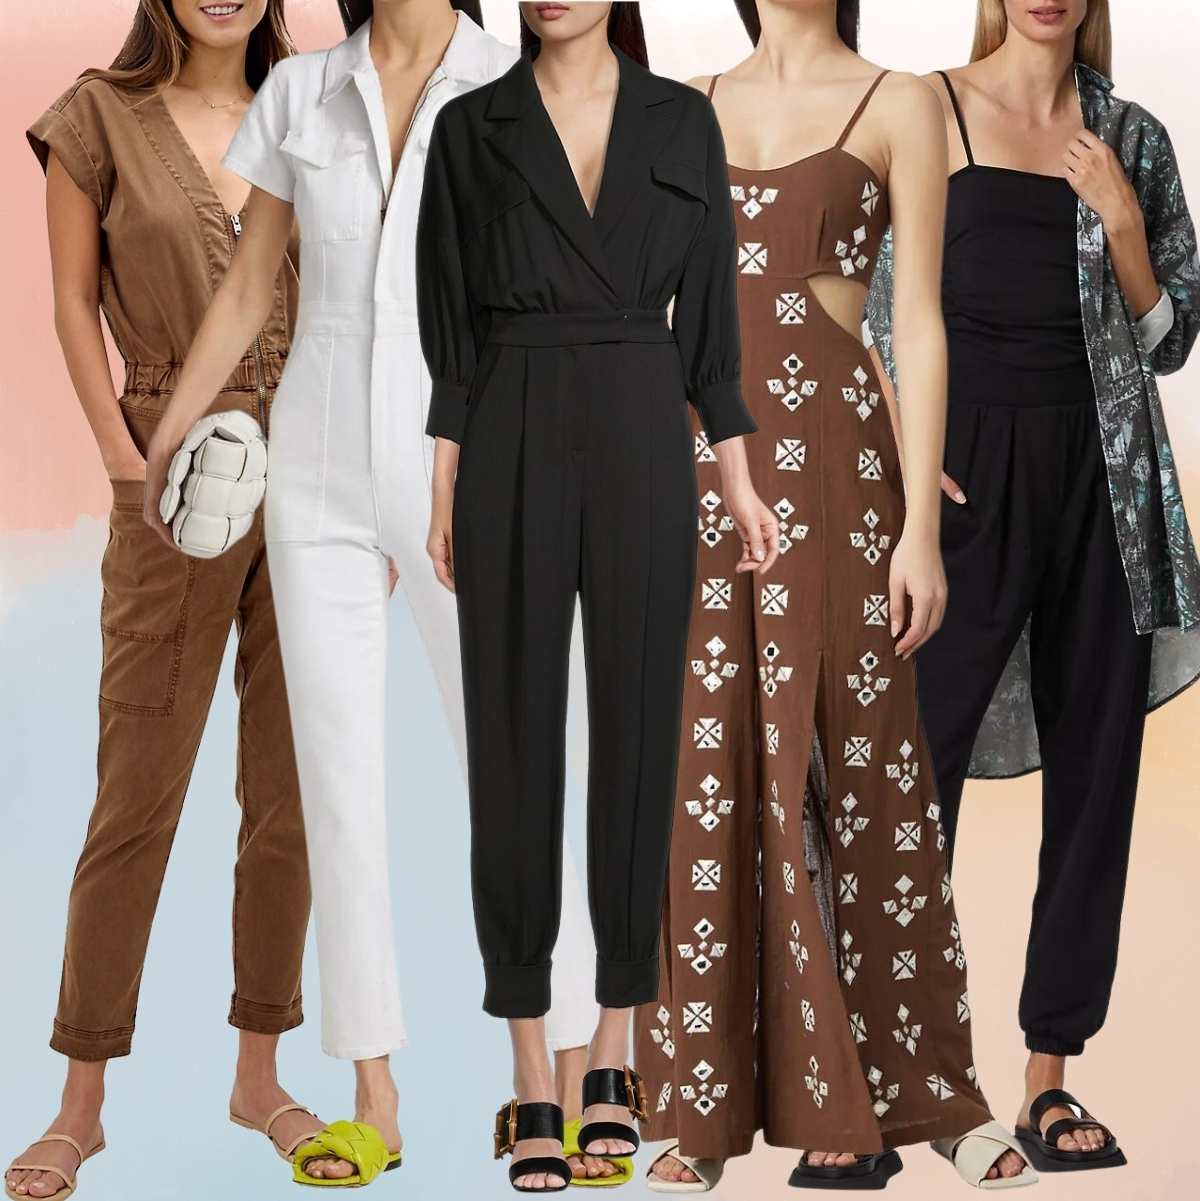 Collage of 5 women wearing different slides outfits with jumpsuits.